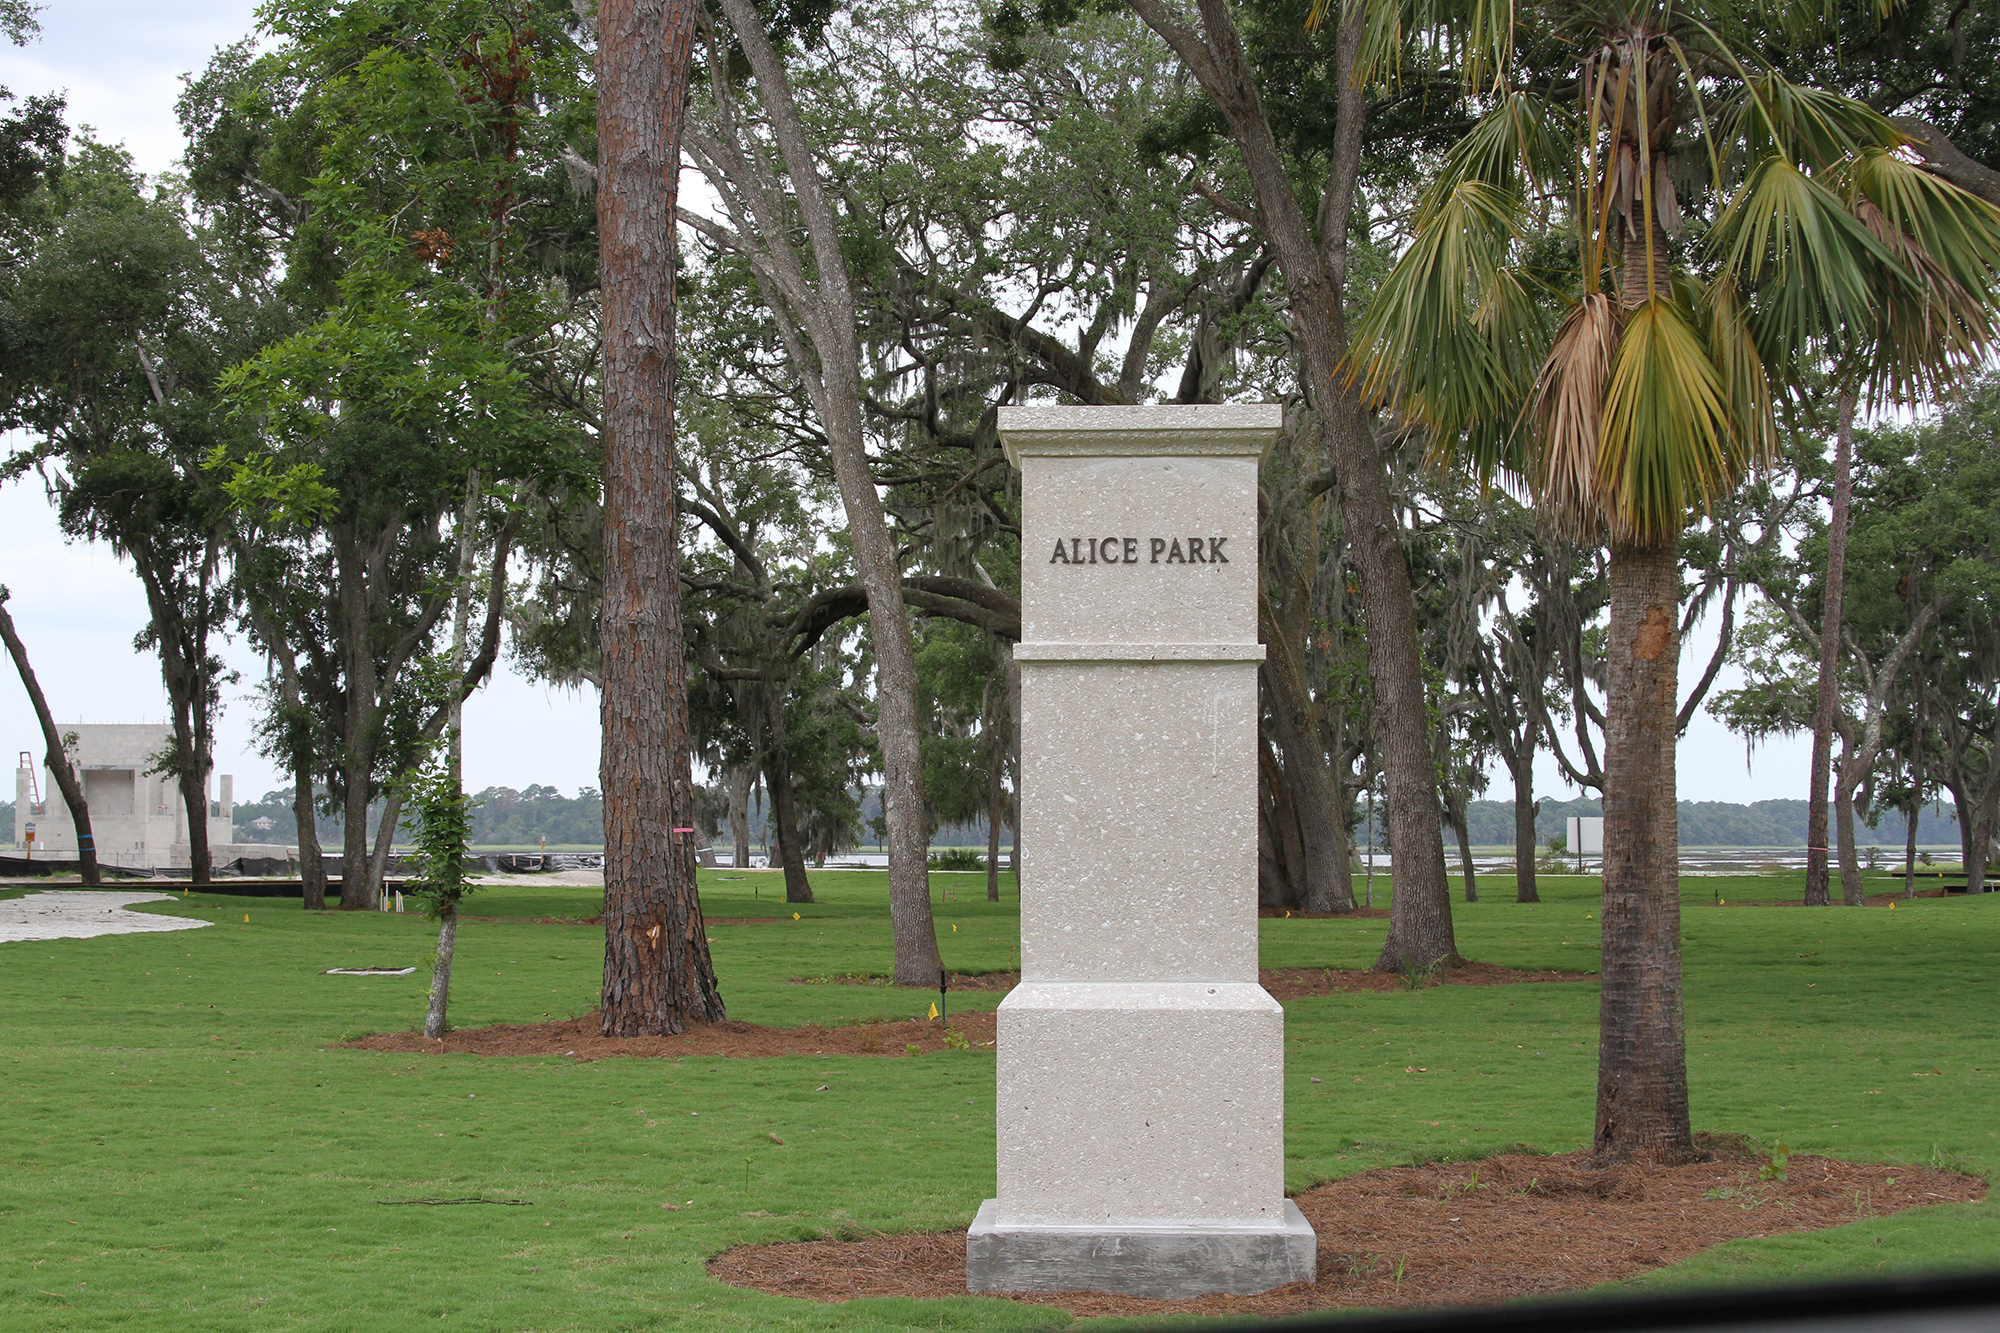 Alice Park, in the middle of Crane Island, is a waterfront park named in honor of decadeslong reclusive resident Sarah Alice Broadbent, known as “Miss Alice.” (Photo by Maggie FitzRoy)